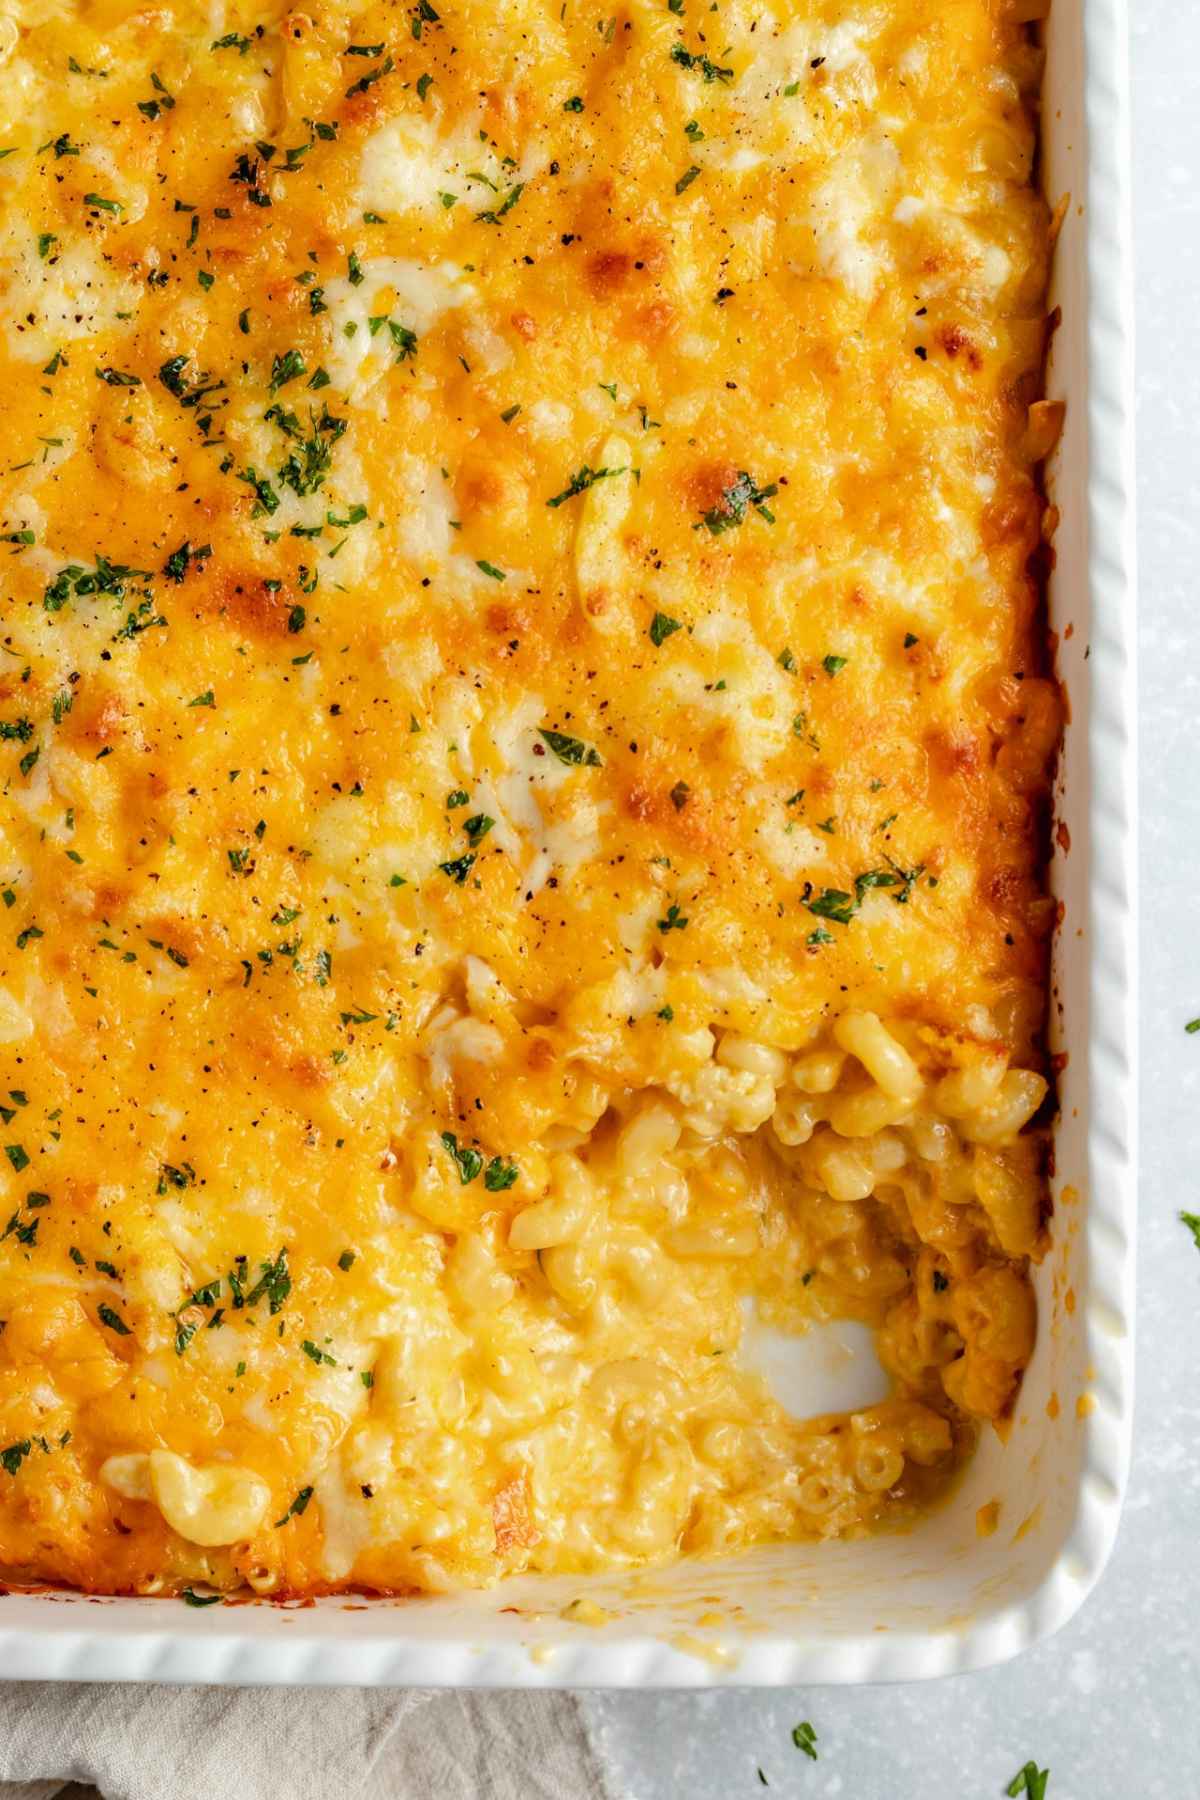 Casserole dish with a serving of macaroni and cheese dished out.